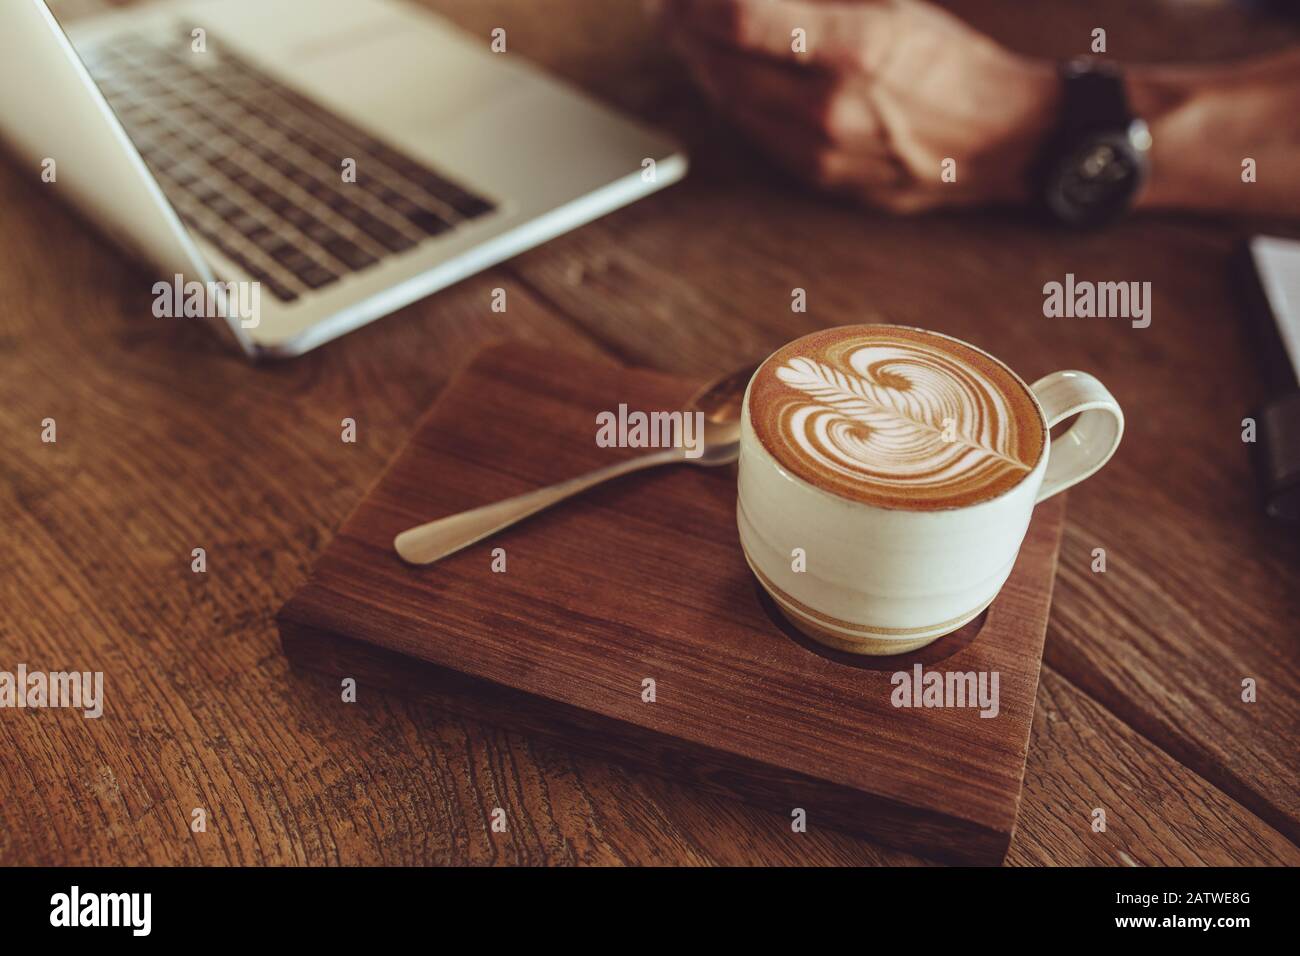 Close-up of cup of cappuccino art coffee on cafe table with a man working on laptop. Coffee cup with milk foam art pattern. Stock Photo